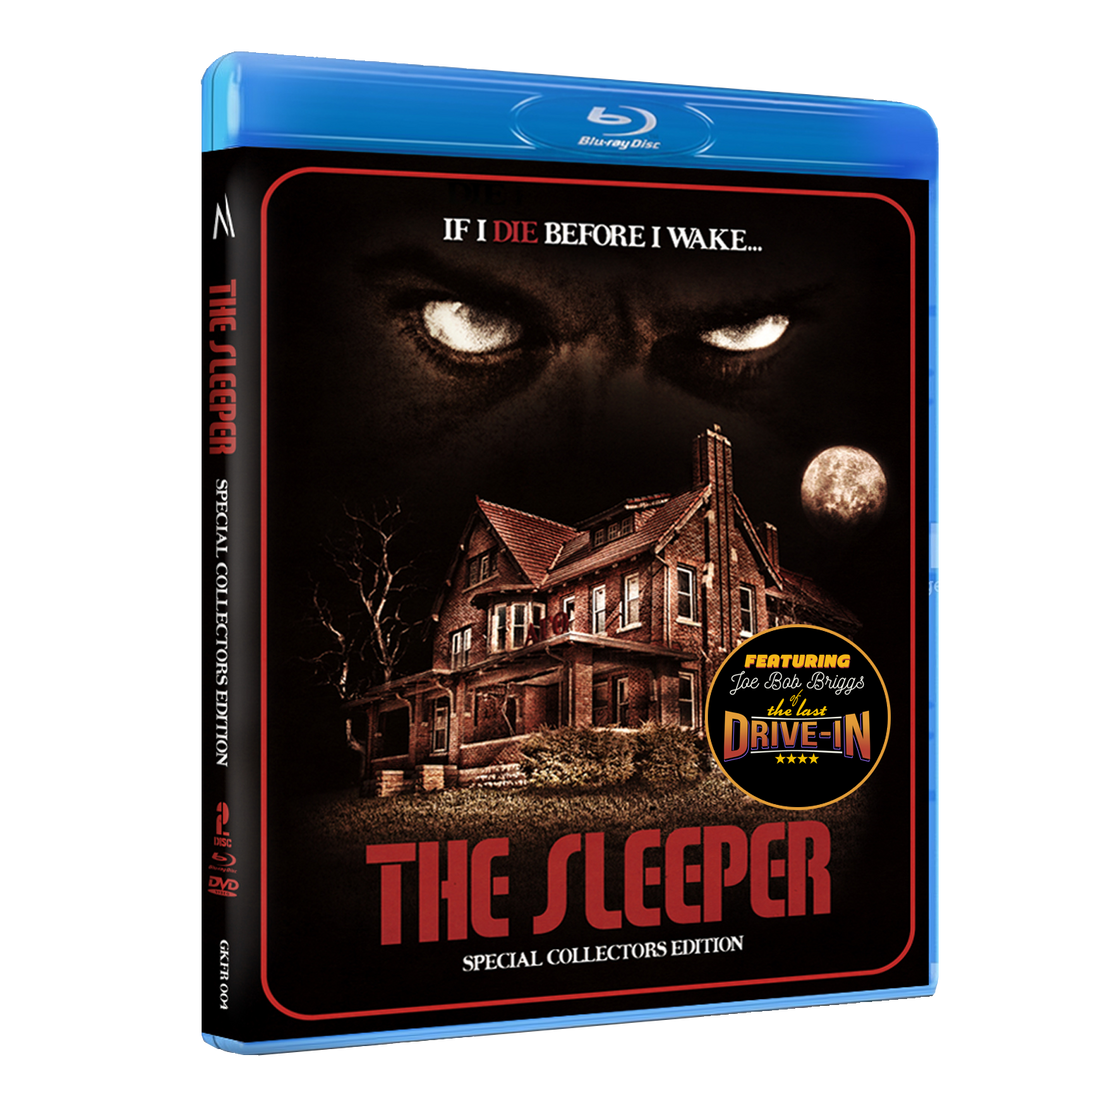 The Sleeper - Special Collectors Edition Blu-ray + DVD Combo Pack – Scream  Team Releasing